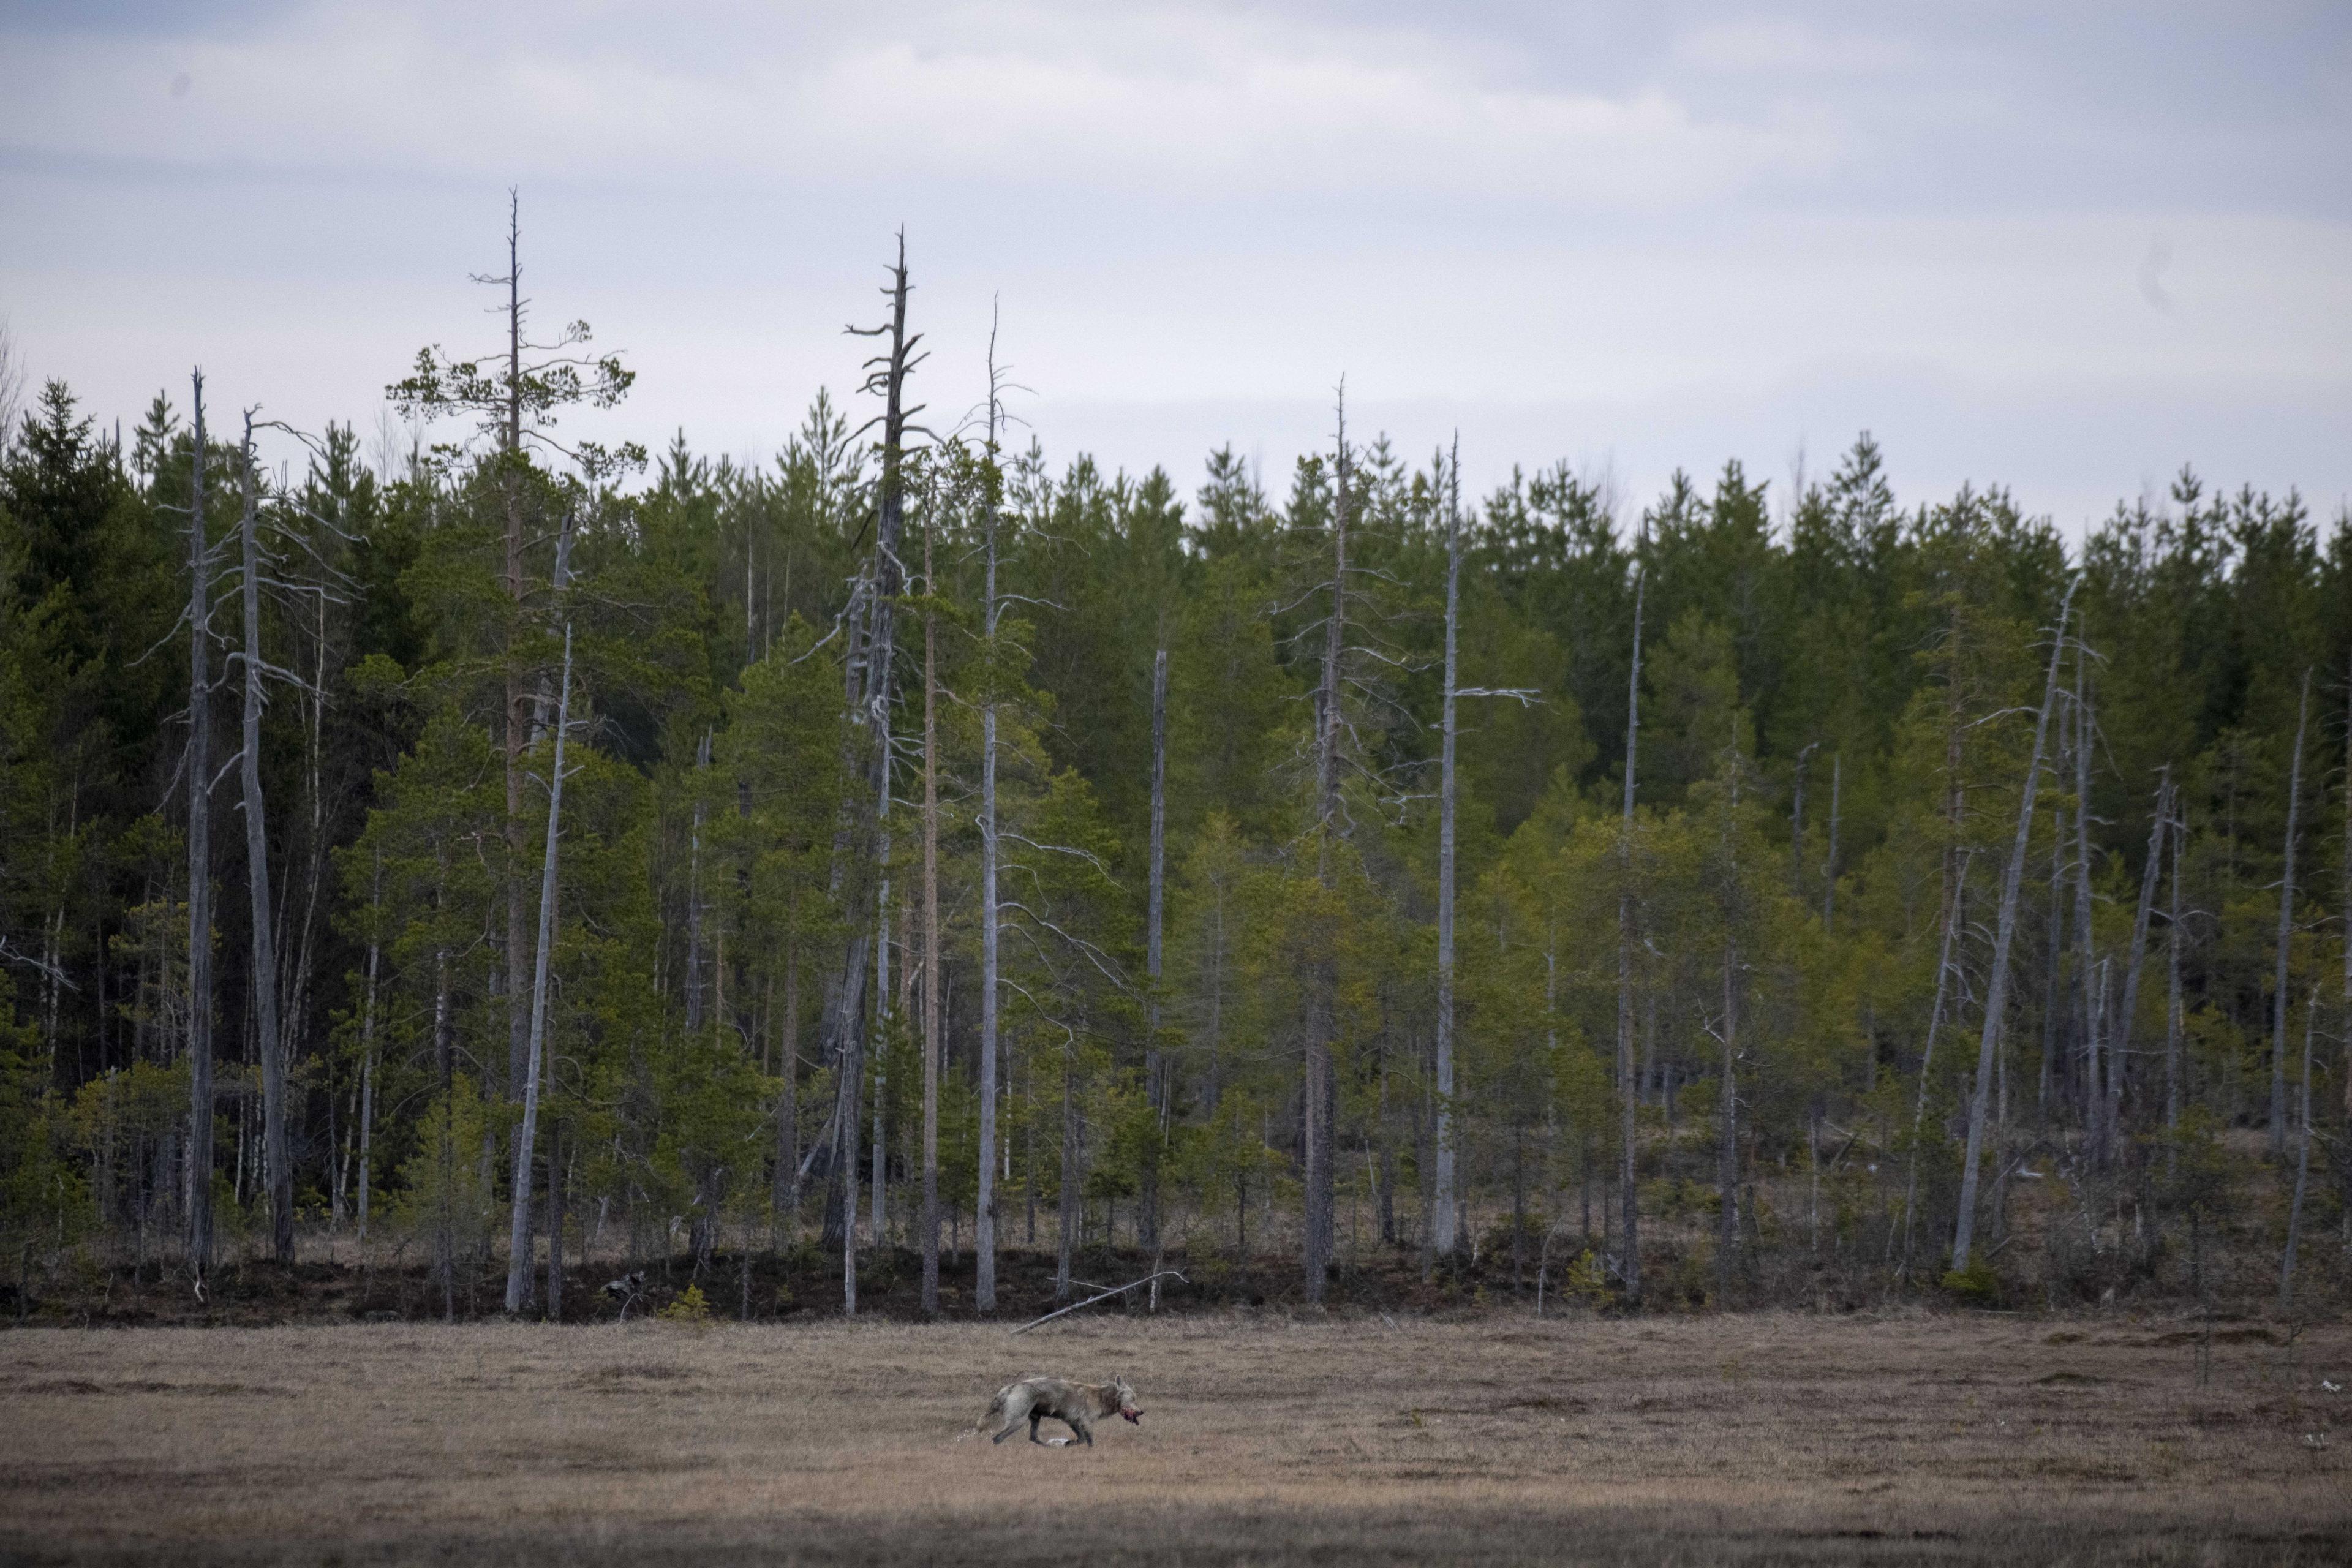 A wolf is photographed in a forest near the Russian border, in Hukkajarvi, eastern Finland, on May 15. Photo: AFP 